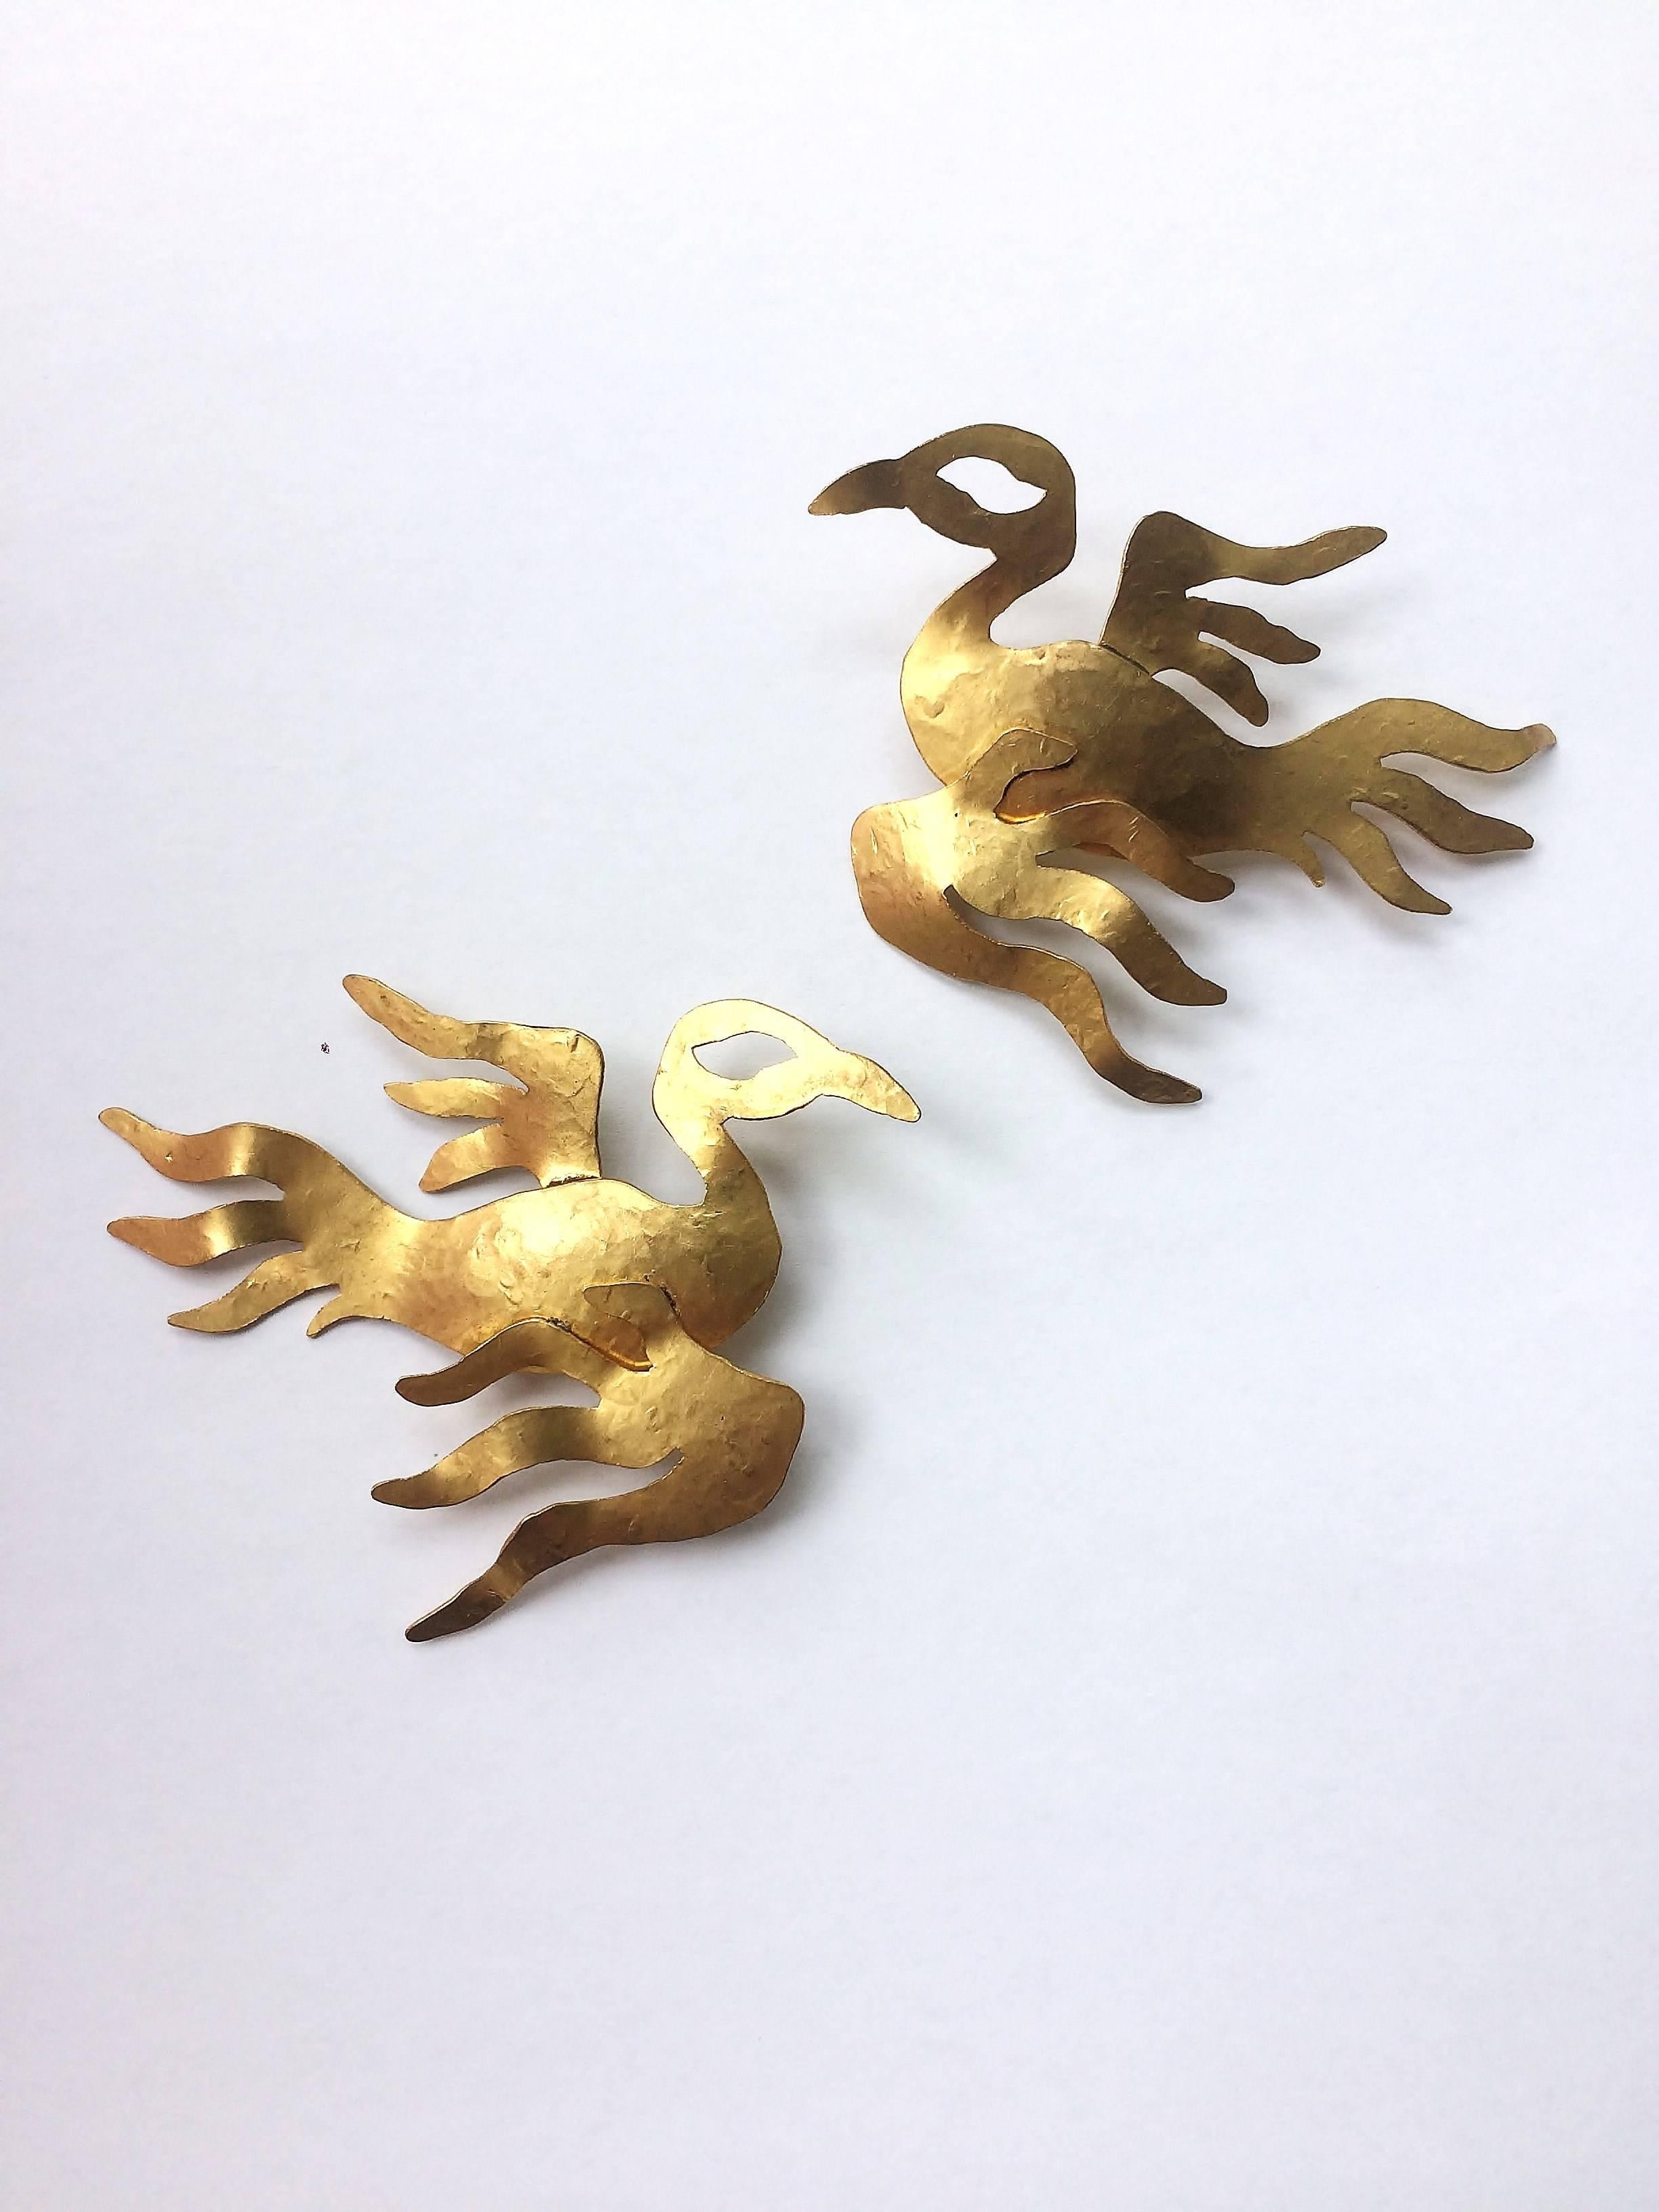 Magical gilt earrings, cut out by hand from fine gilded brass, in the form of two 'phoenix', by French artisan designer Herve Van Der Straeten. Cut out and assembled by hand, created in Paris, these are real statement earrings, resplendent, wearable